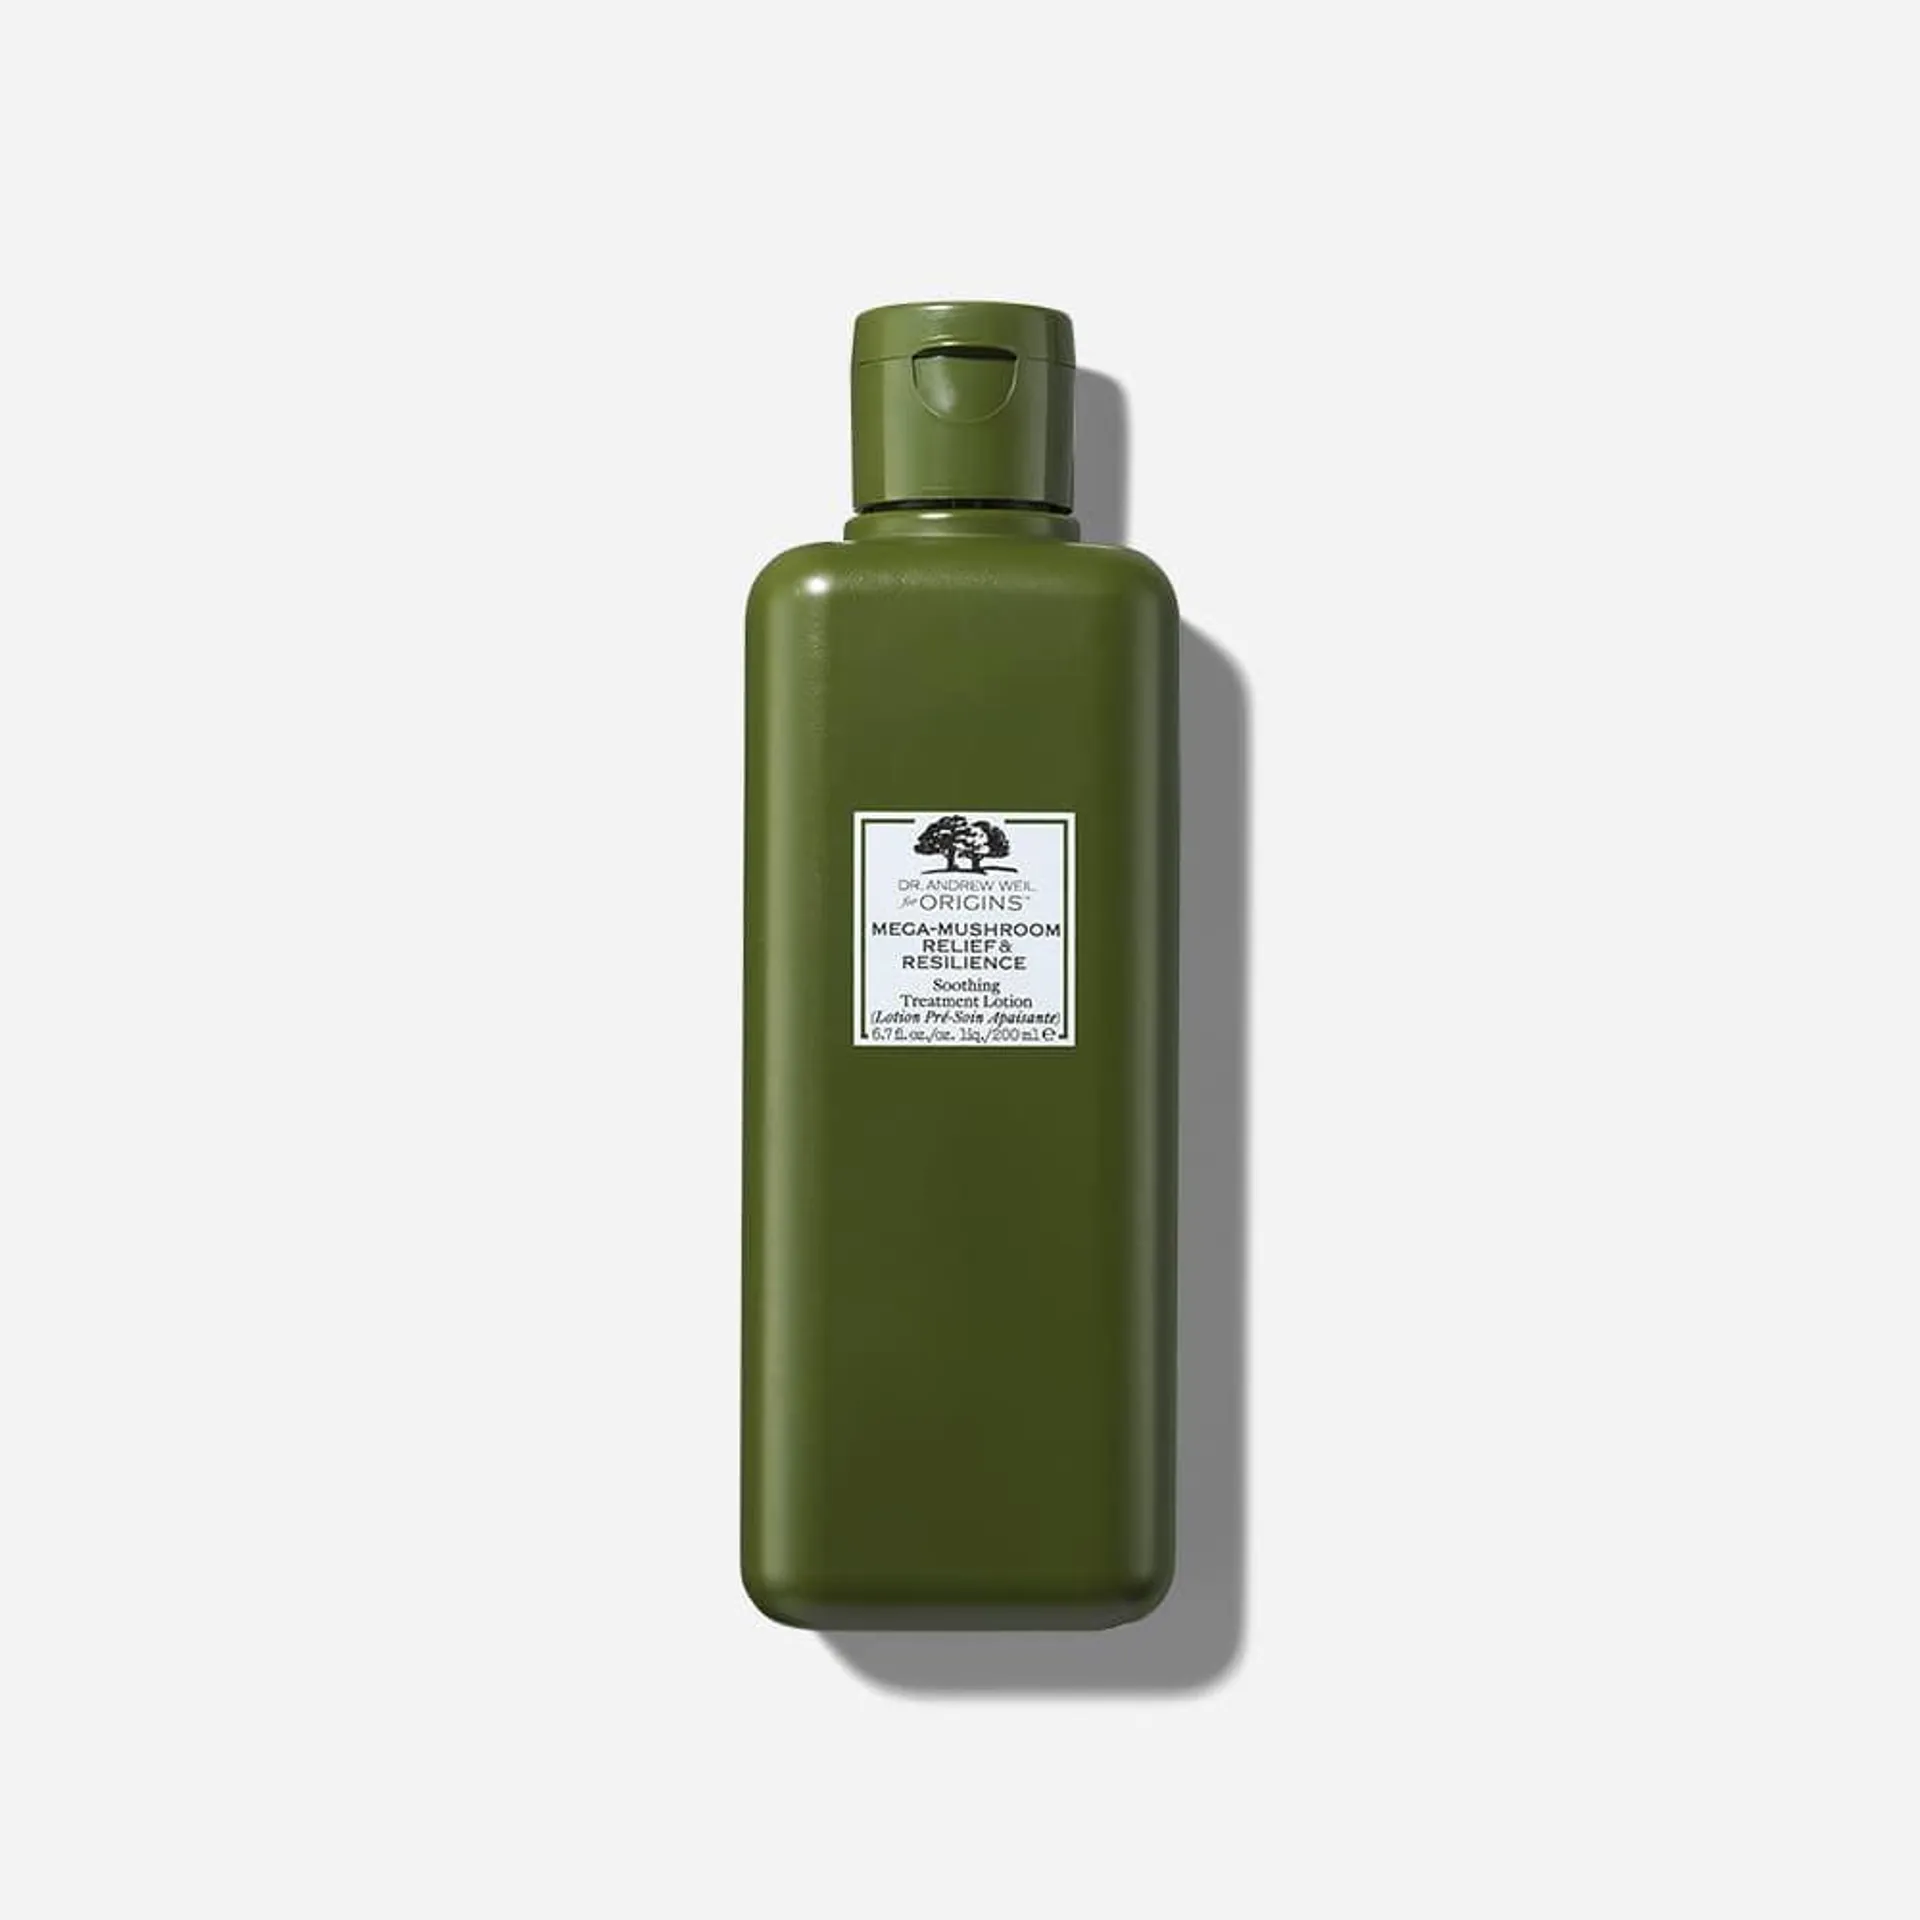 Dr. Andrew Weil for Origins™ Mega-Mushroom Relief & Resilience Soothing Treatment Lotion, 200ml